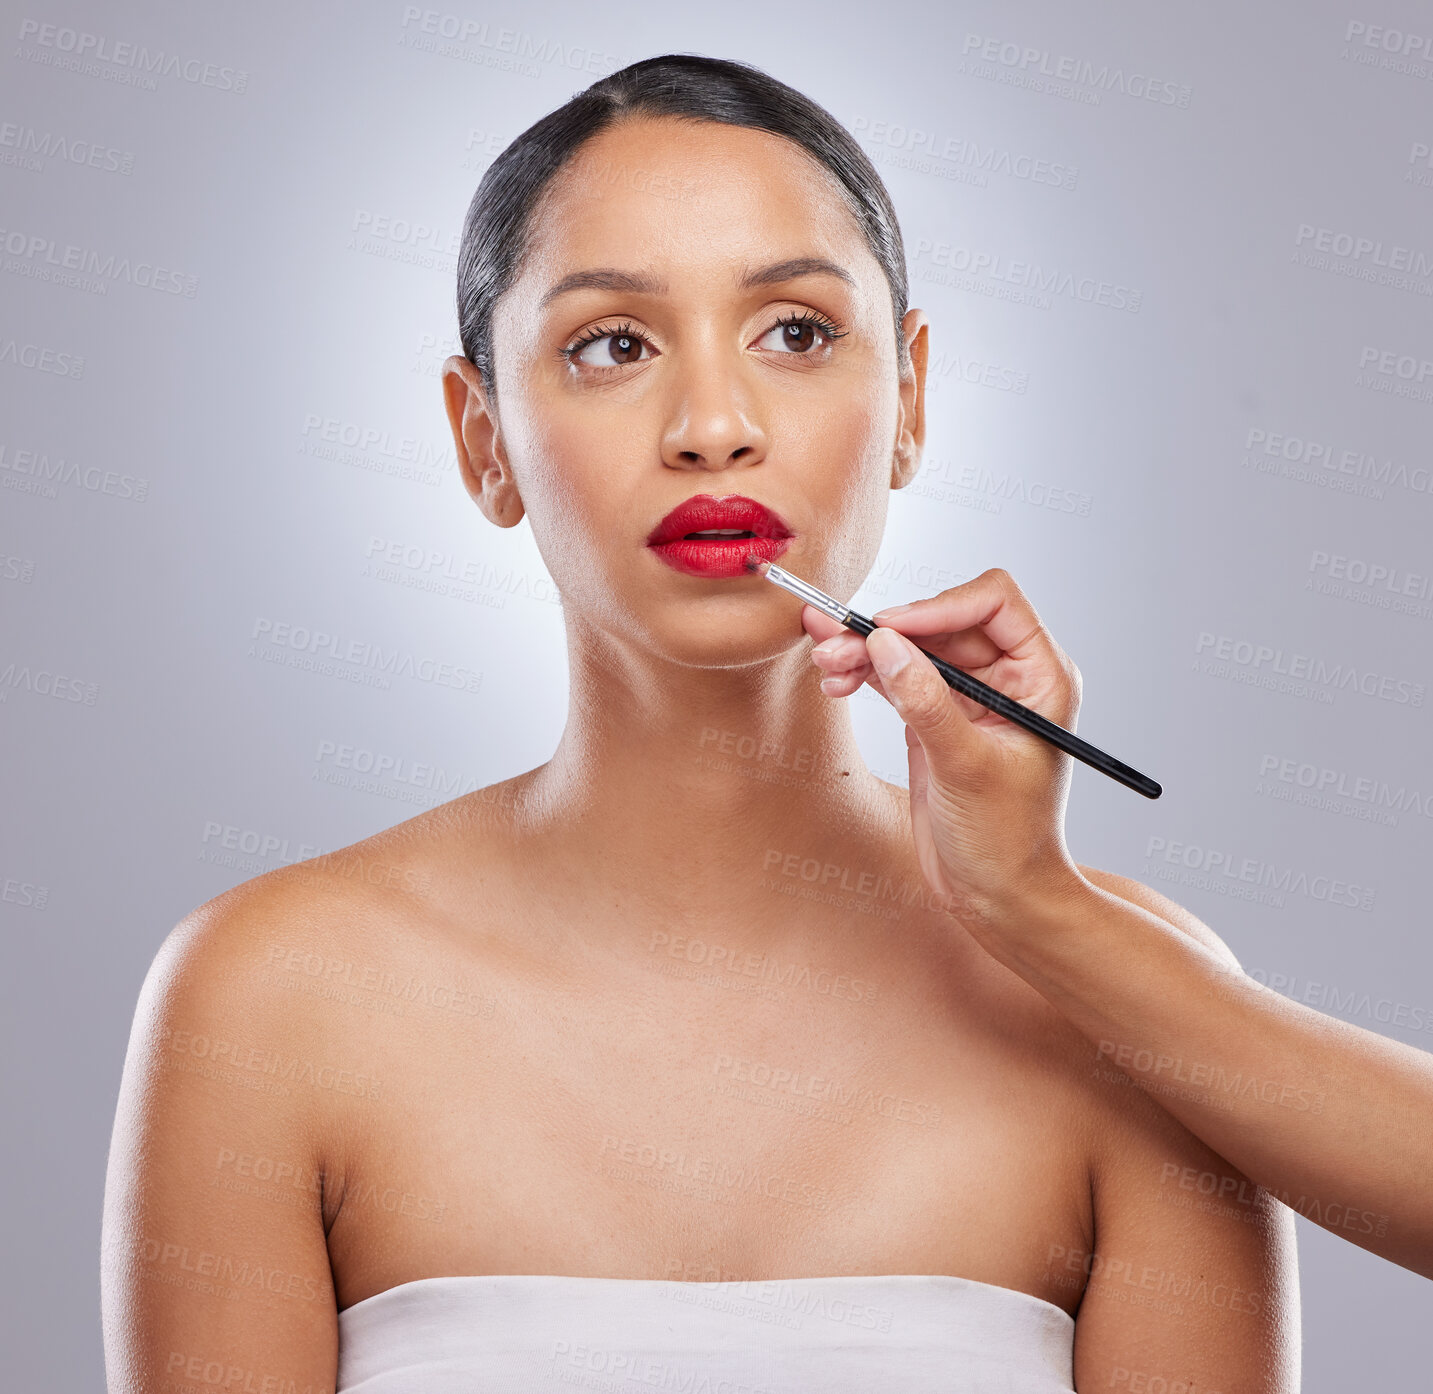 Buy stock photo Shot of an attractive young woman standing in the studio while a makeup artist applies lipstick